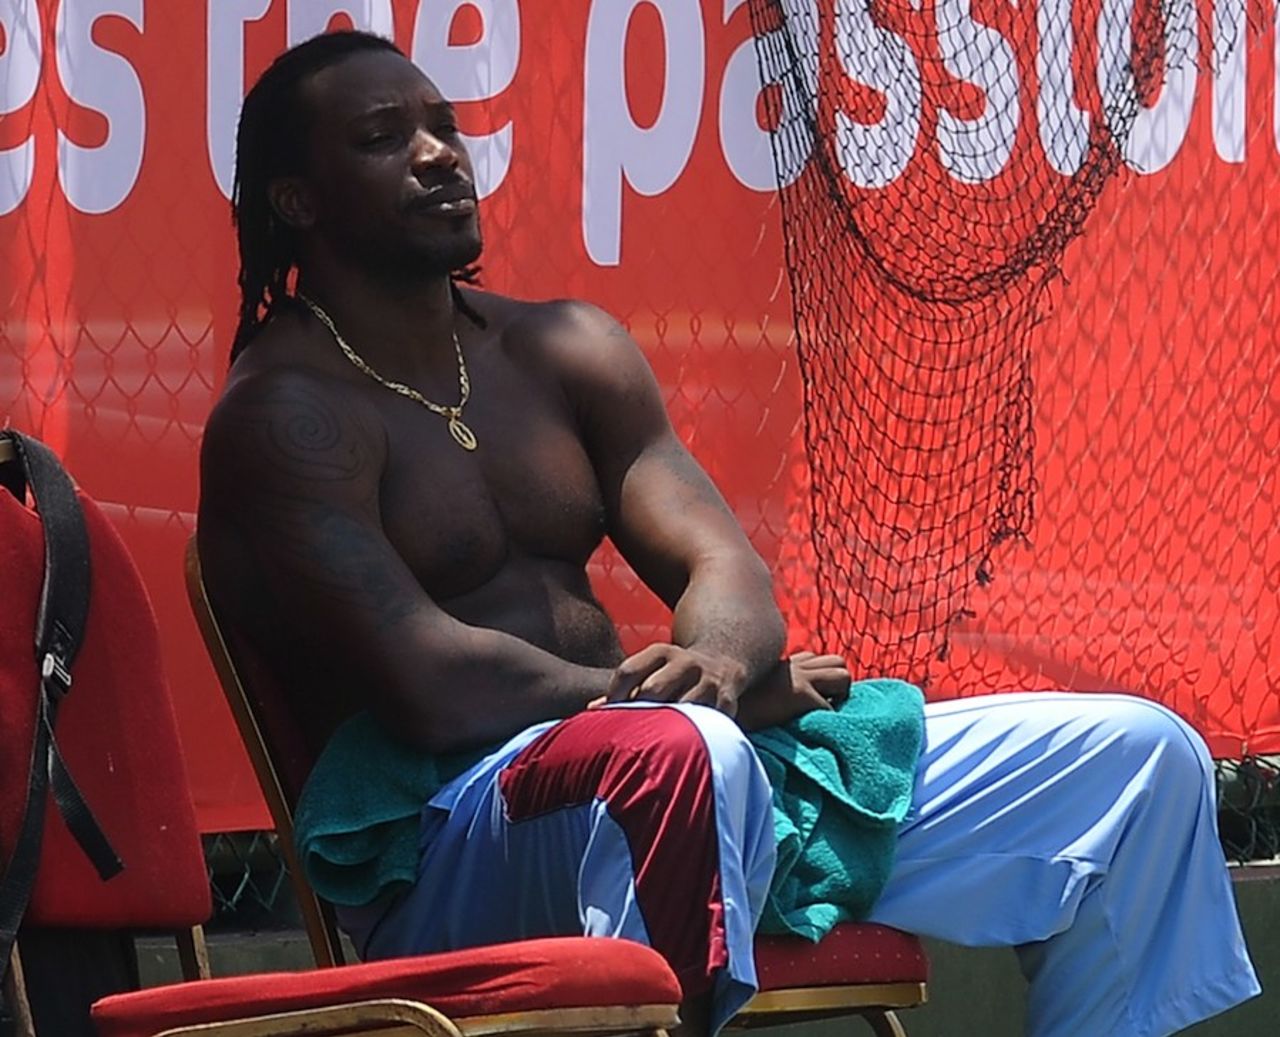 Chris Gayle relaxes during a net session on his birthday, World Twenty20, Colombo, September 21, 2012